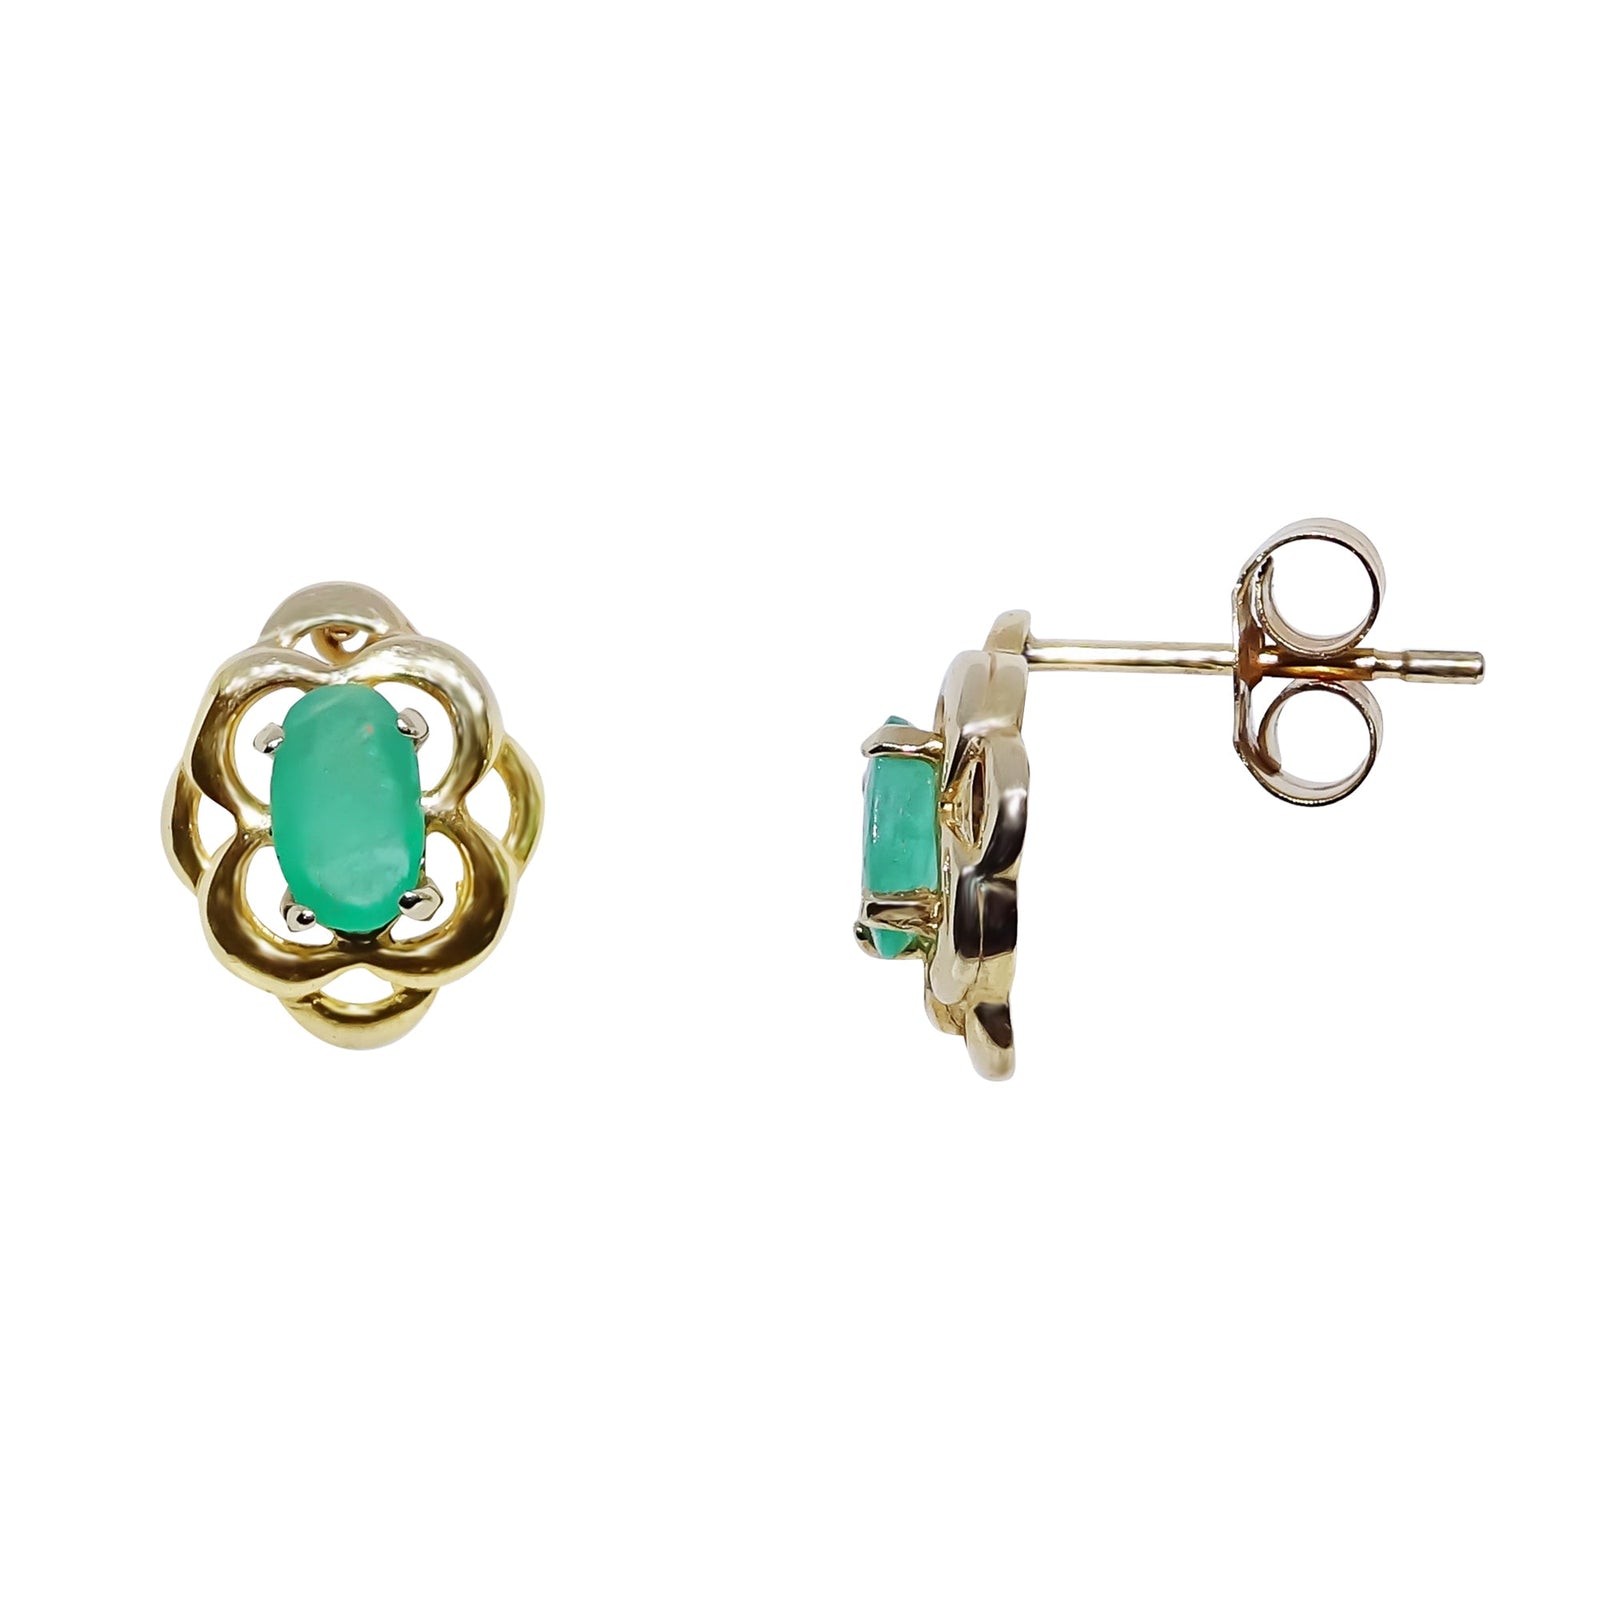 9ct gold celtic style 5x3mm oval emerald stud earrings